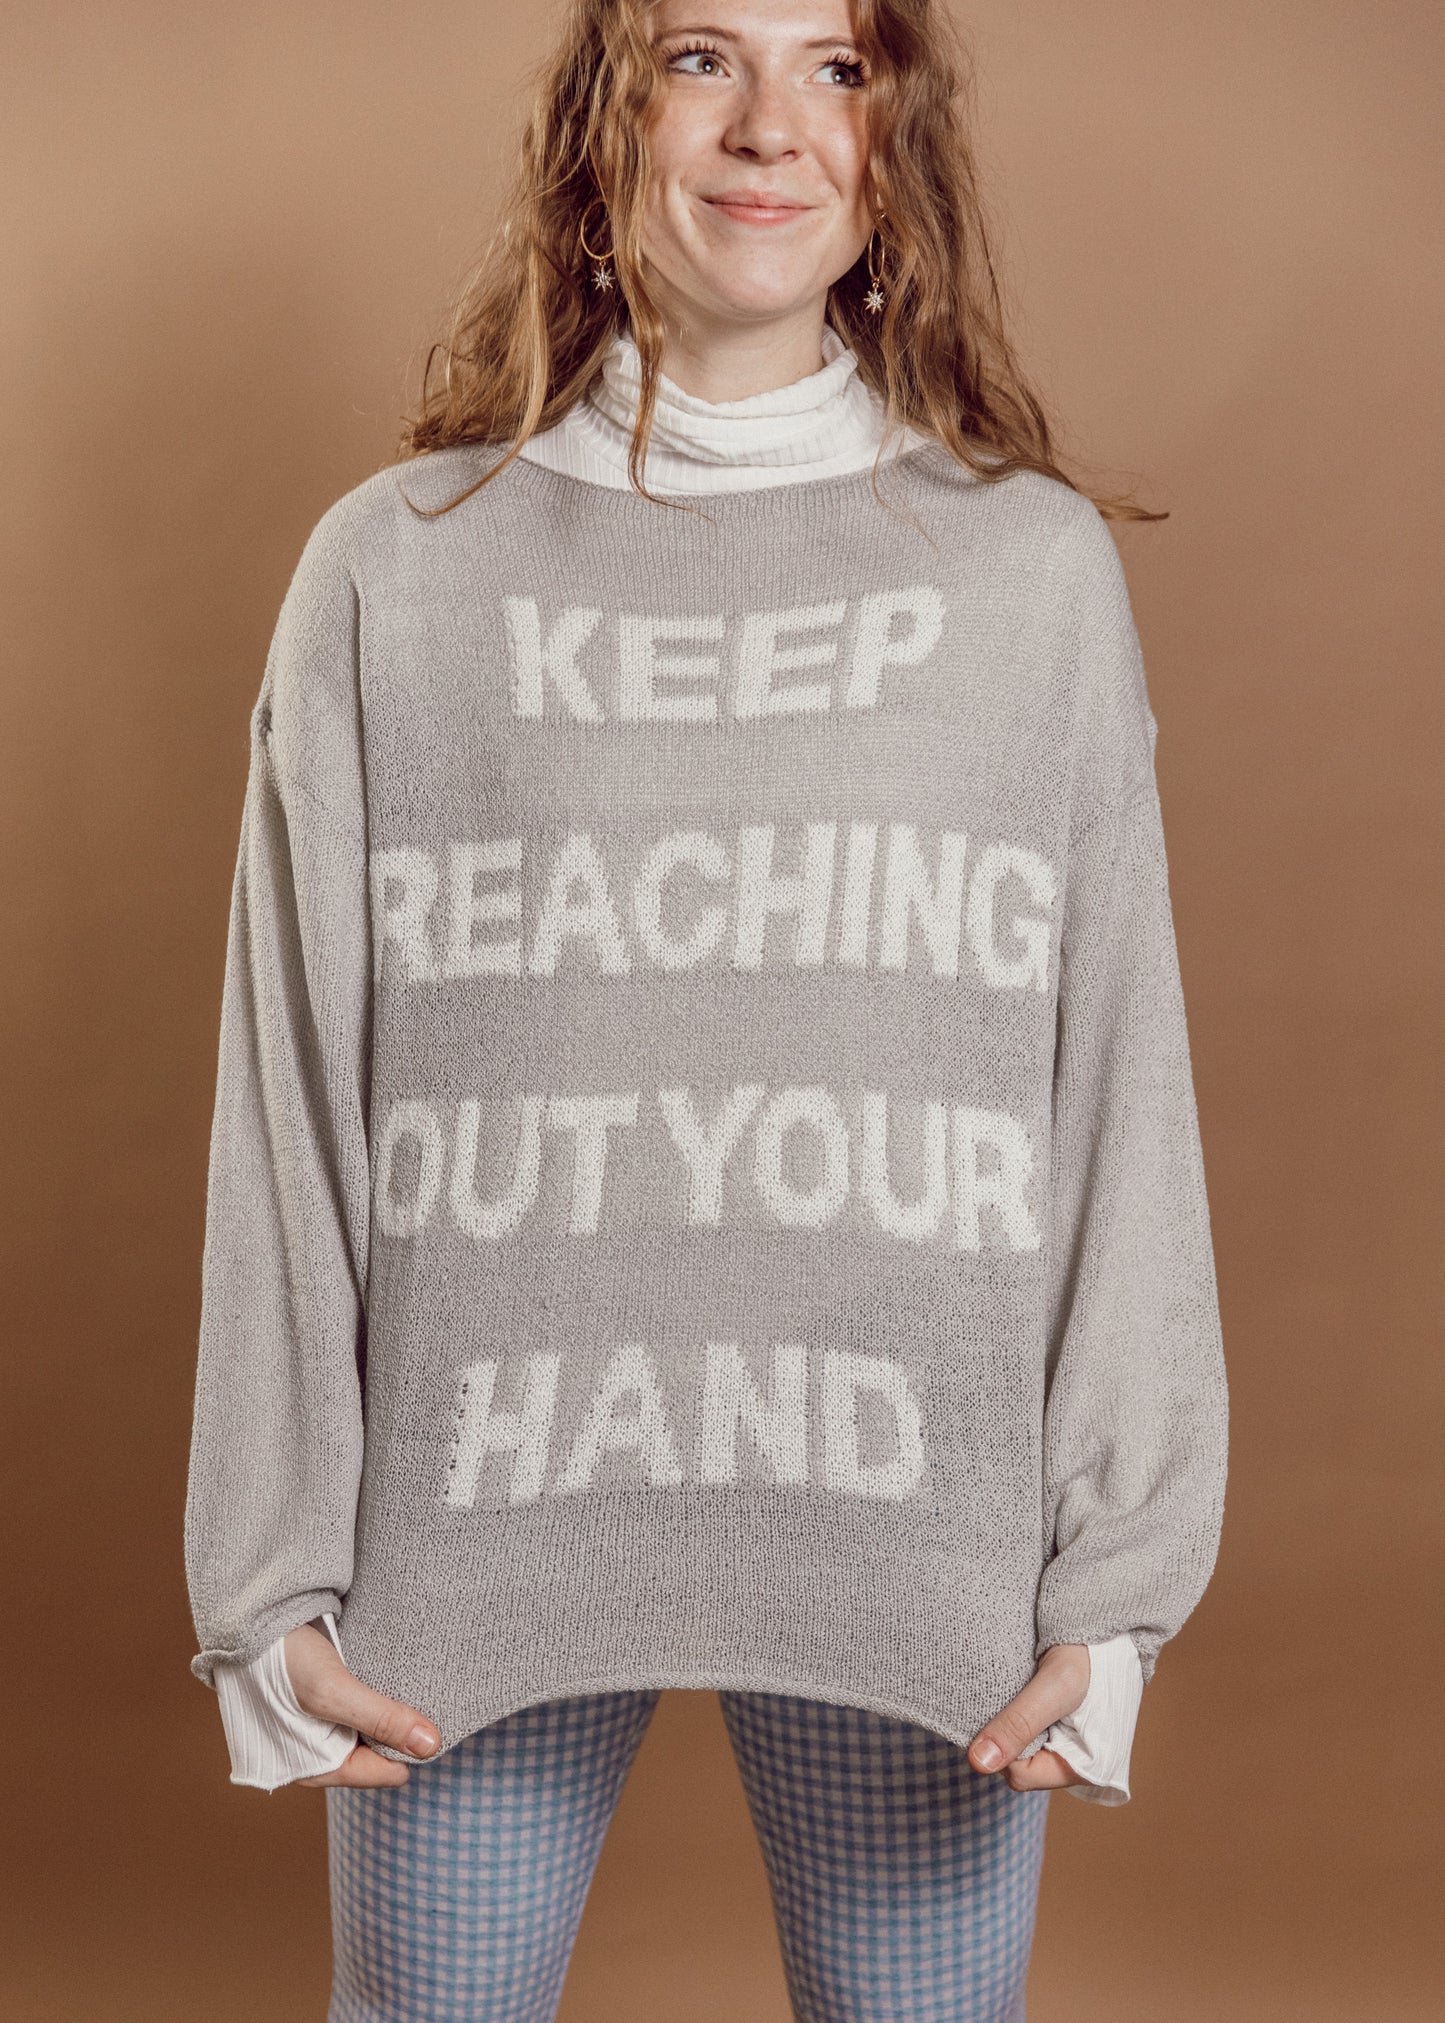 keep reaching out your hand sweater